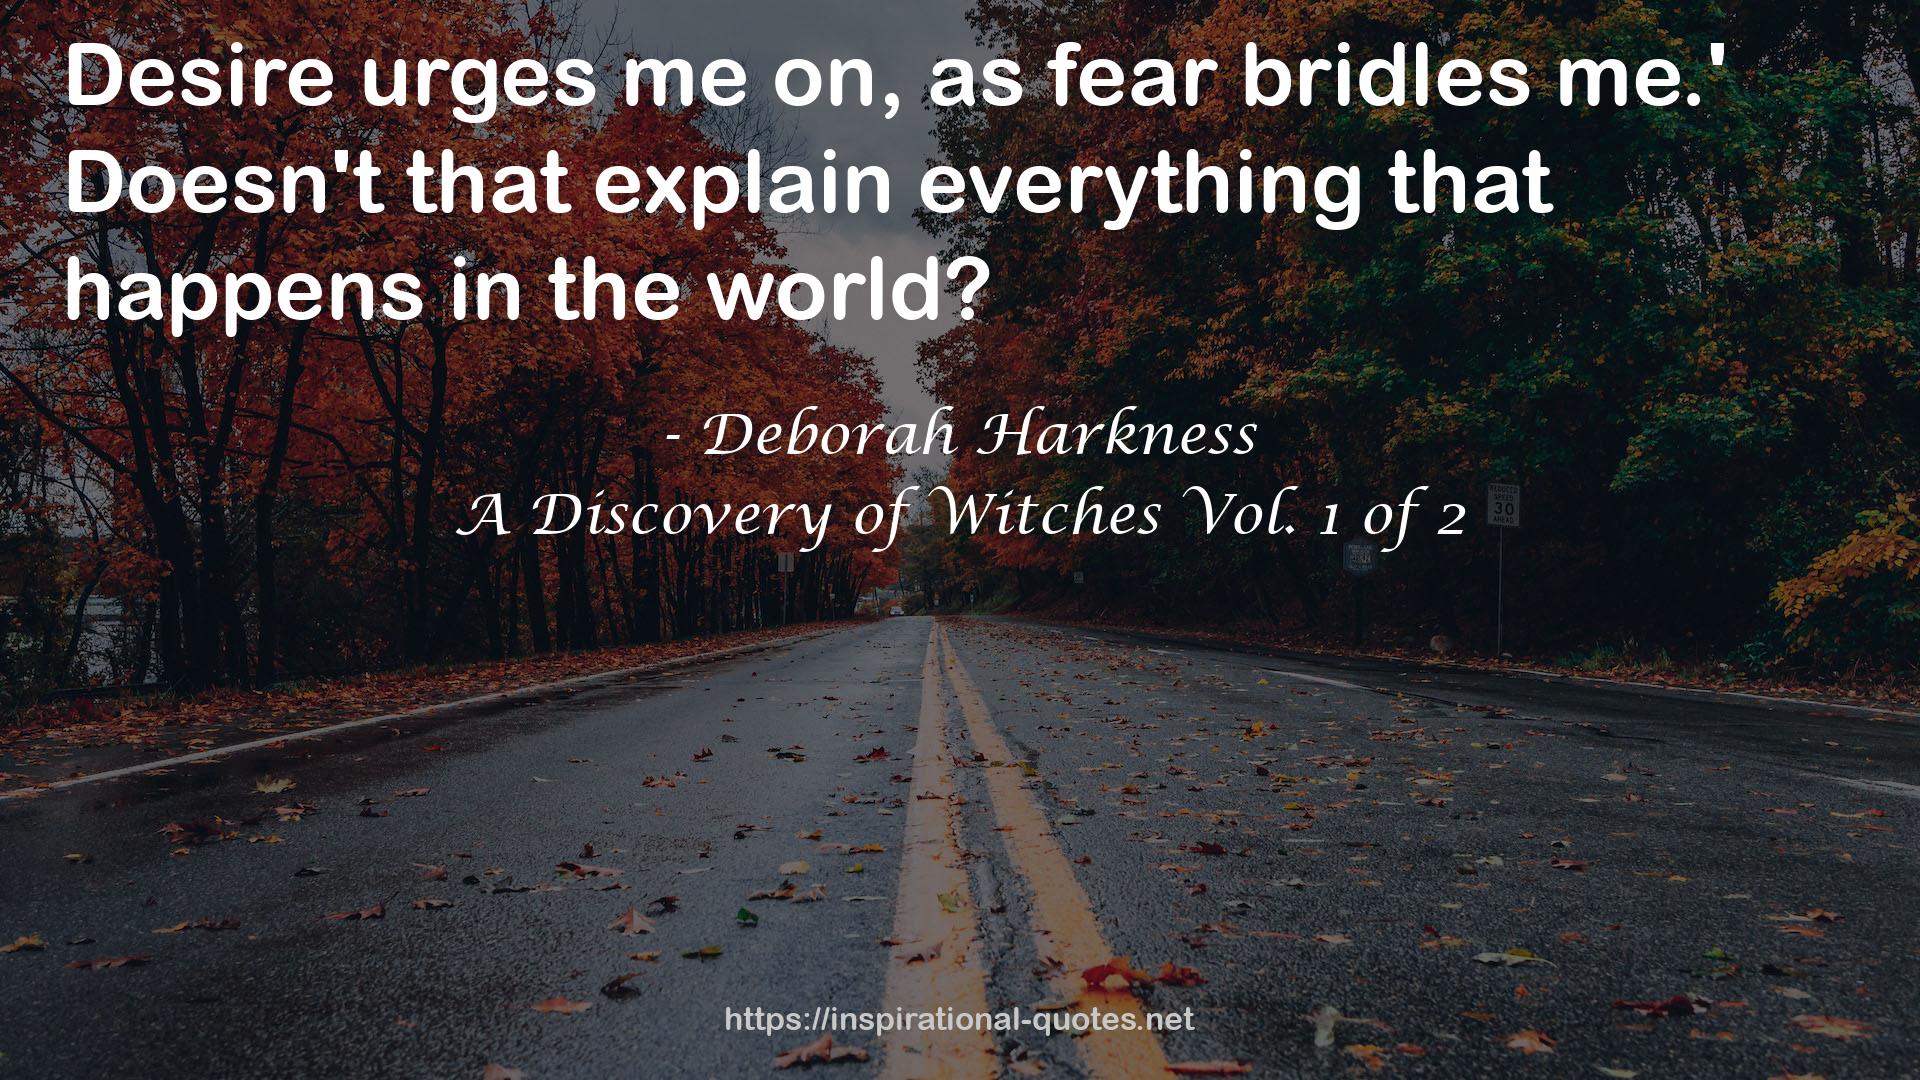 A Discovery of Witches Vol. 1 of 2 QUOTES